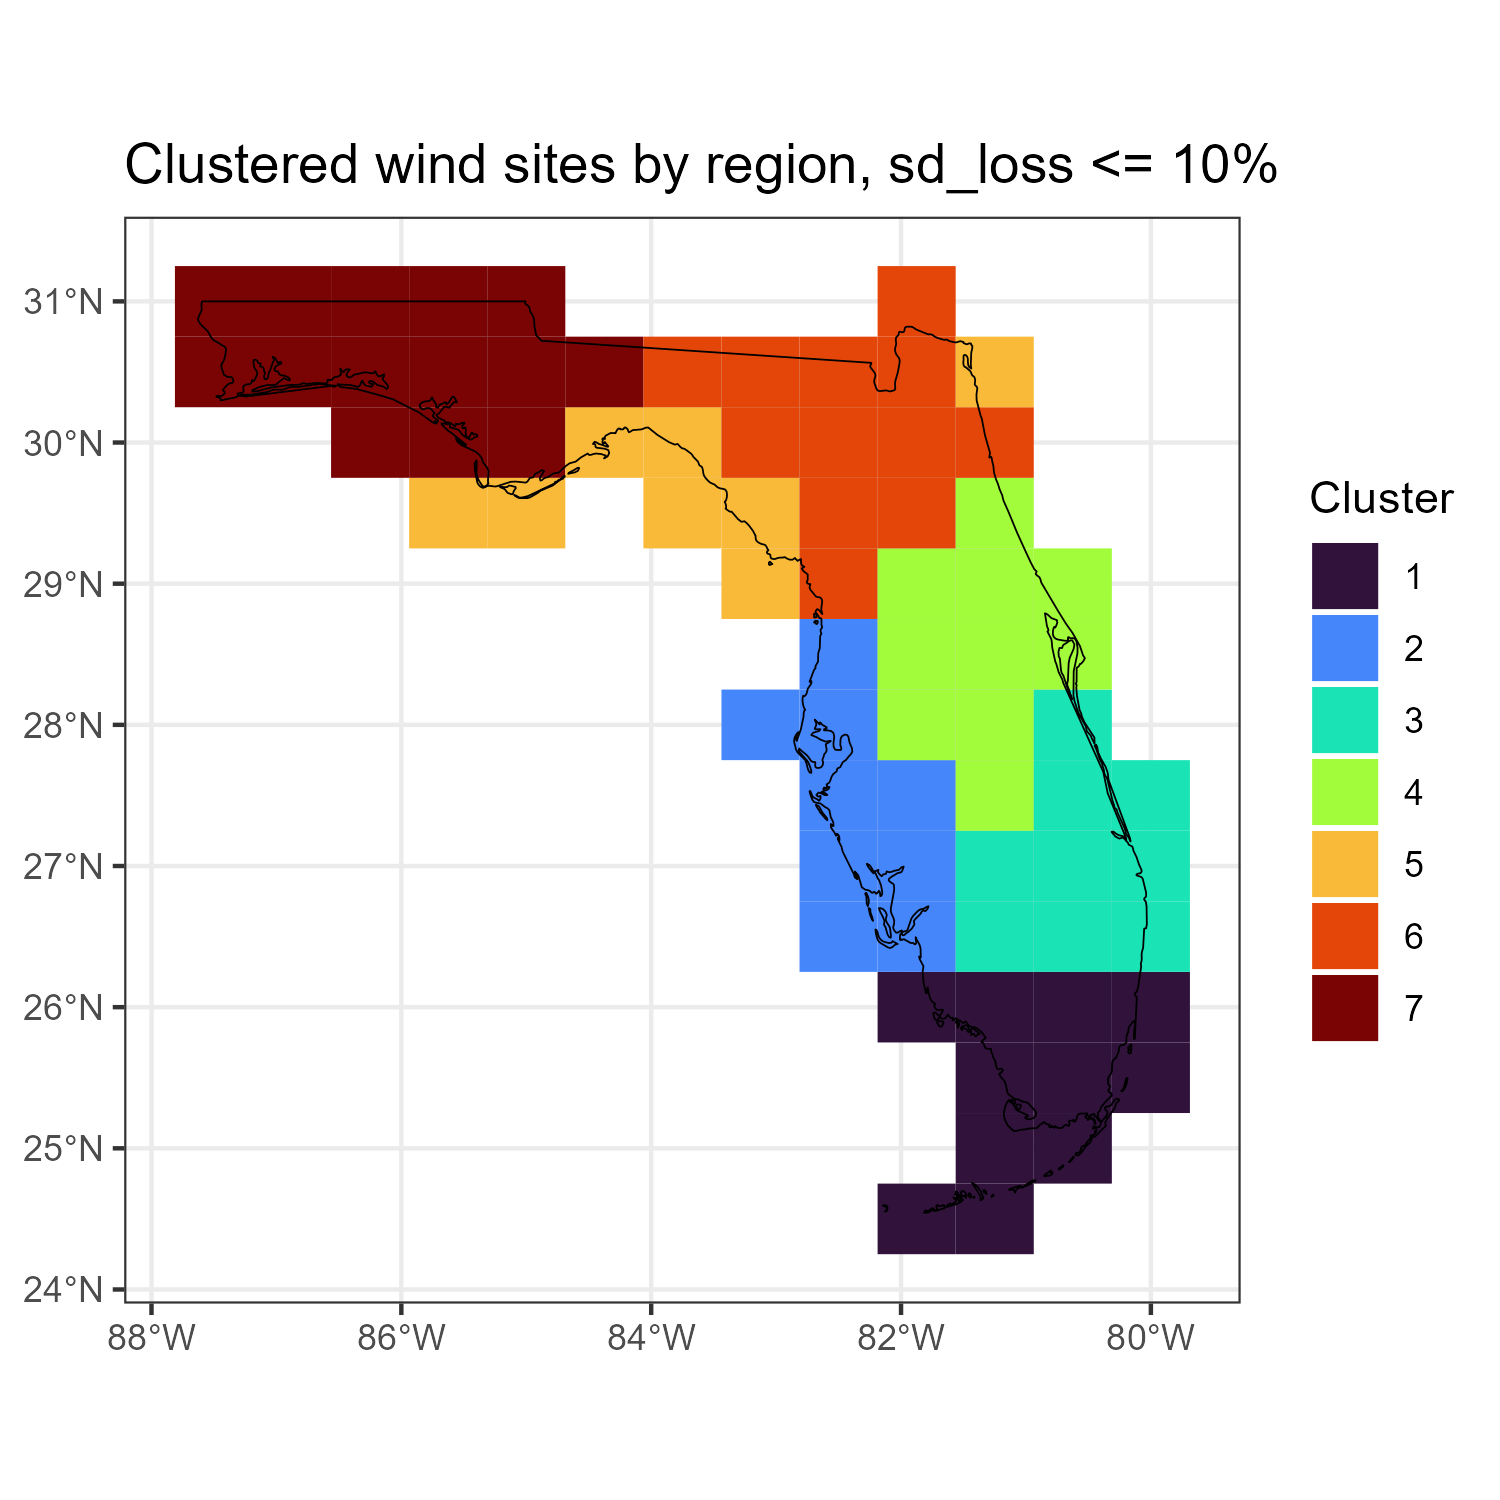 Clustered location based on correlation of wind capacity factors